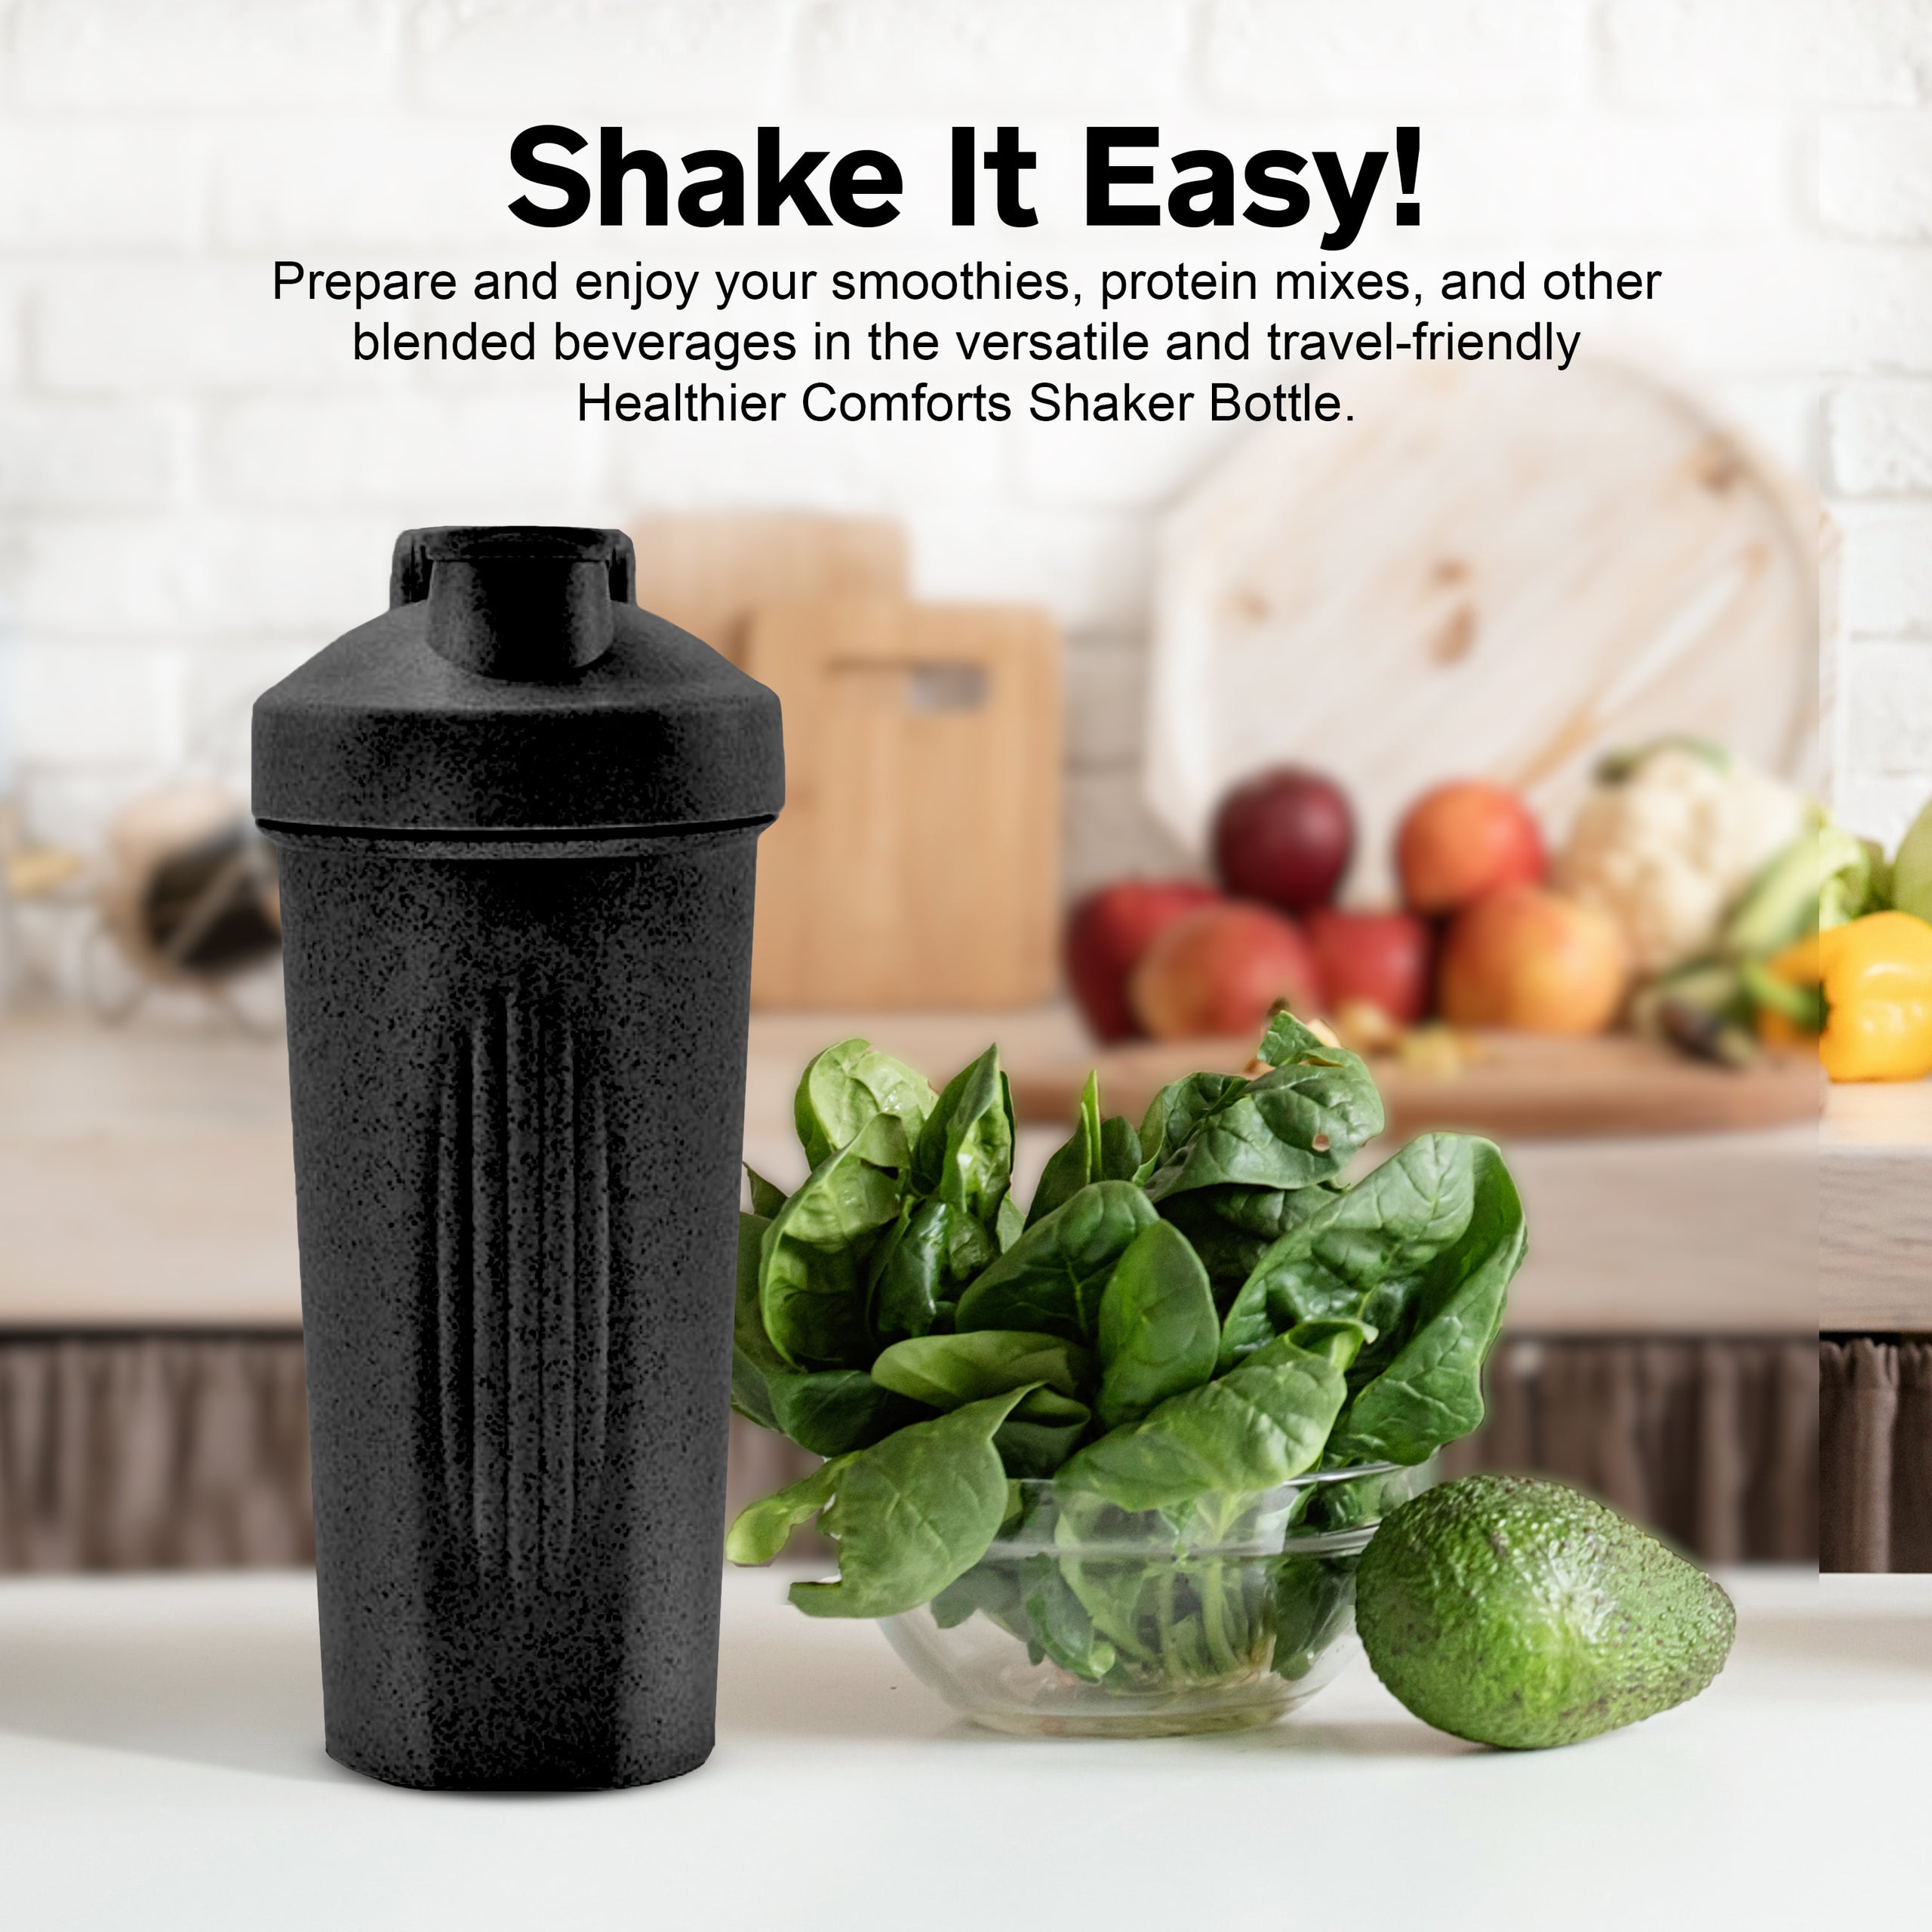 Eco-Friendly Shaker Bottle w/ Mixer Ball, 24 oz. (700ml), BPA Free,  Biodegradable, Wheat Straw, Sustainable, Protein Drinks, Smoothies,  Pre-Workout, Dishwasher Safe, Shatter-Proof